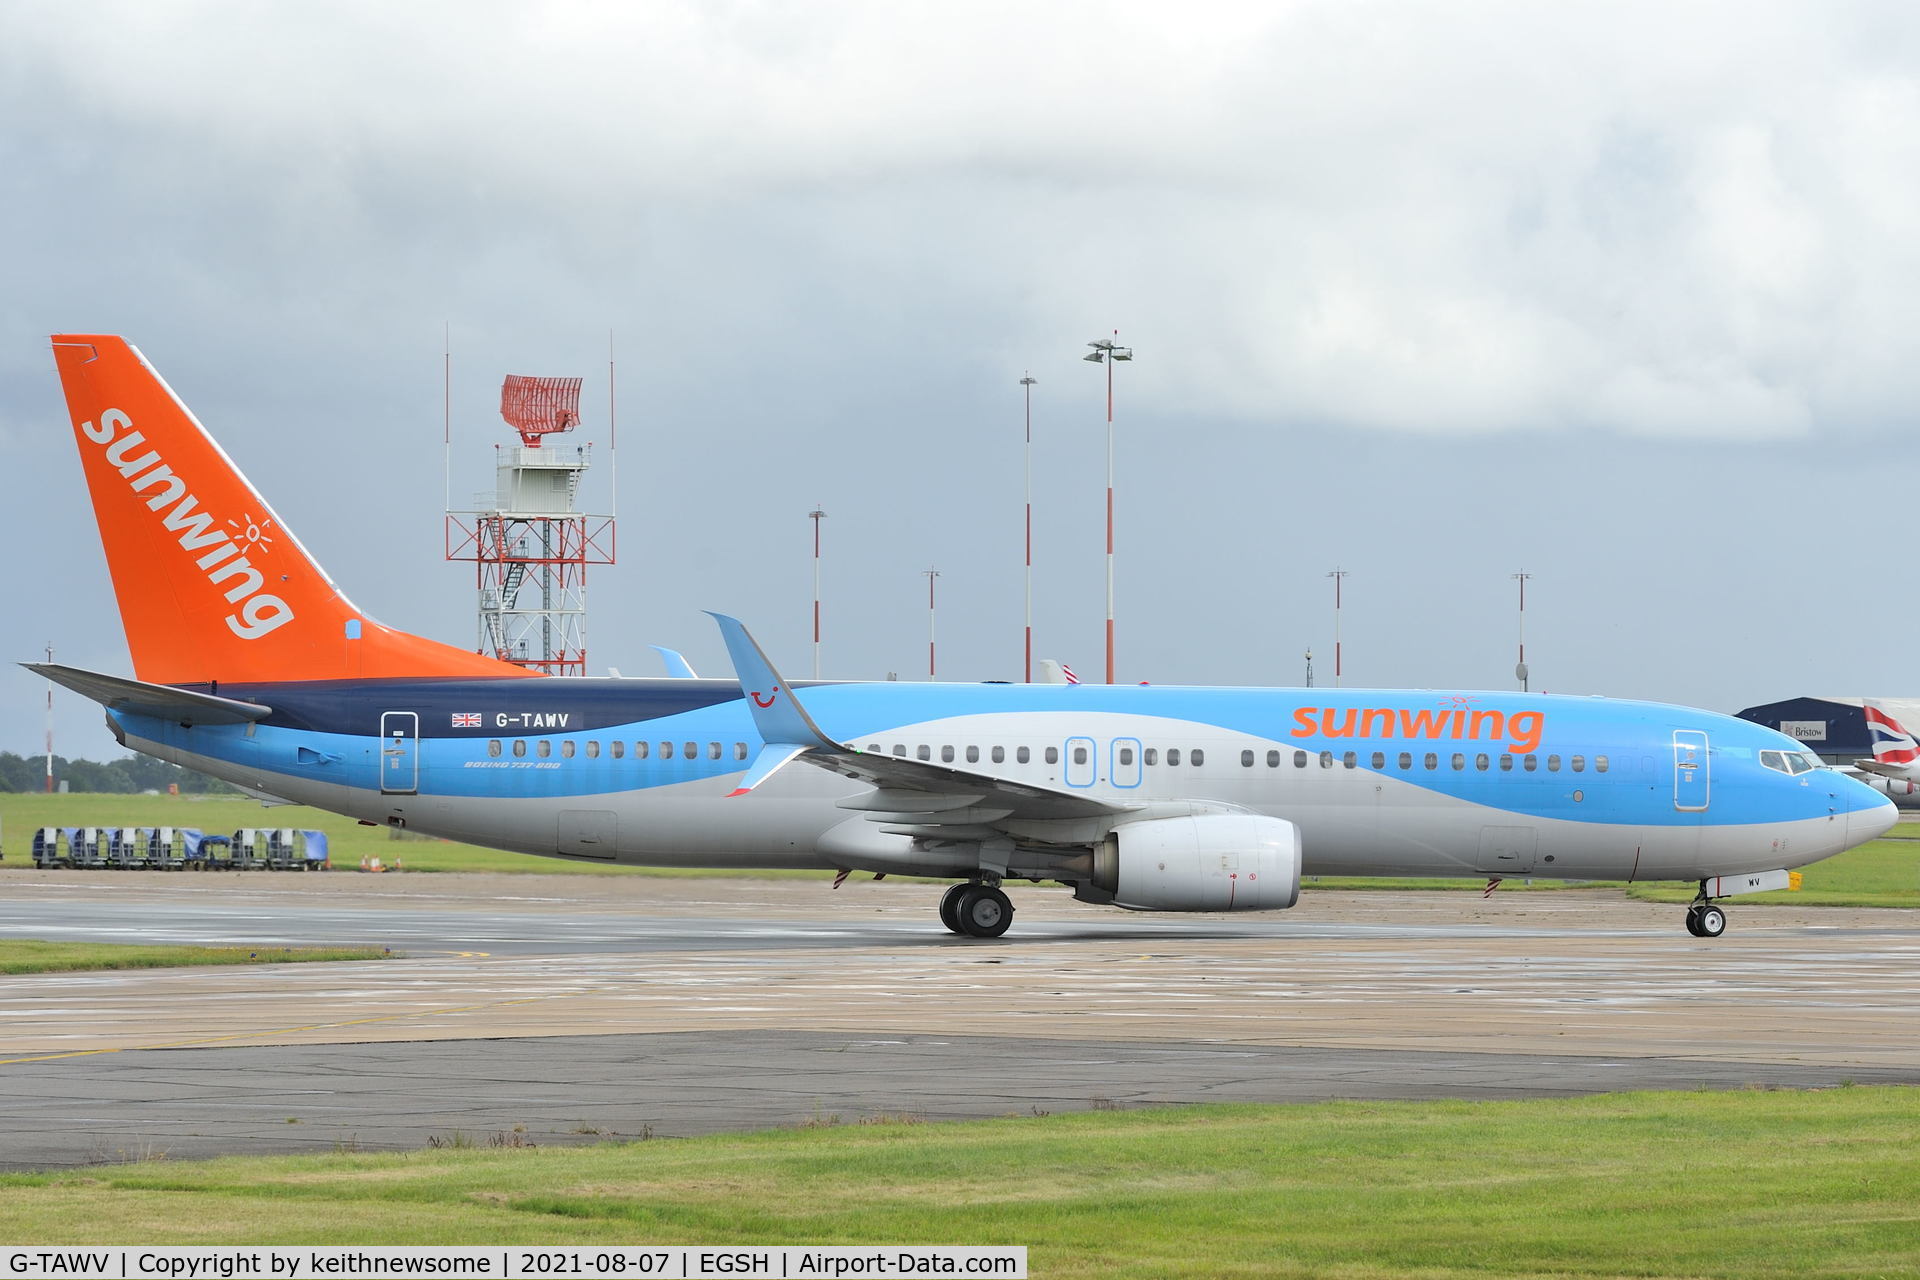 G-TAWV, 2015 Boeing 737-8K5 C/N 41662, Arriving at Norwich from Majorca with Sunwing fin and logo.